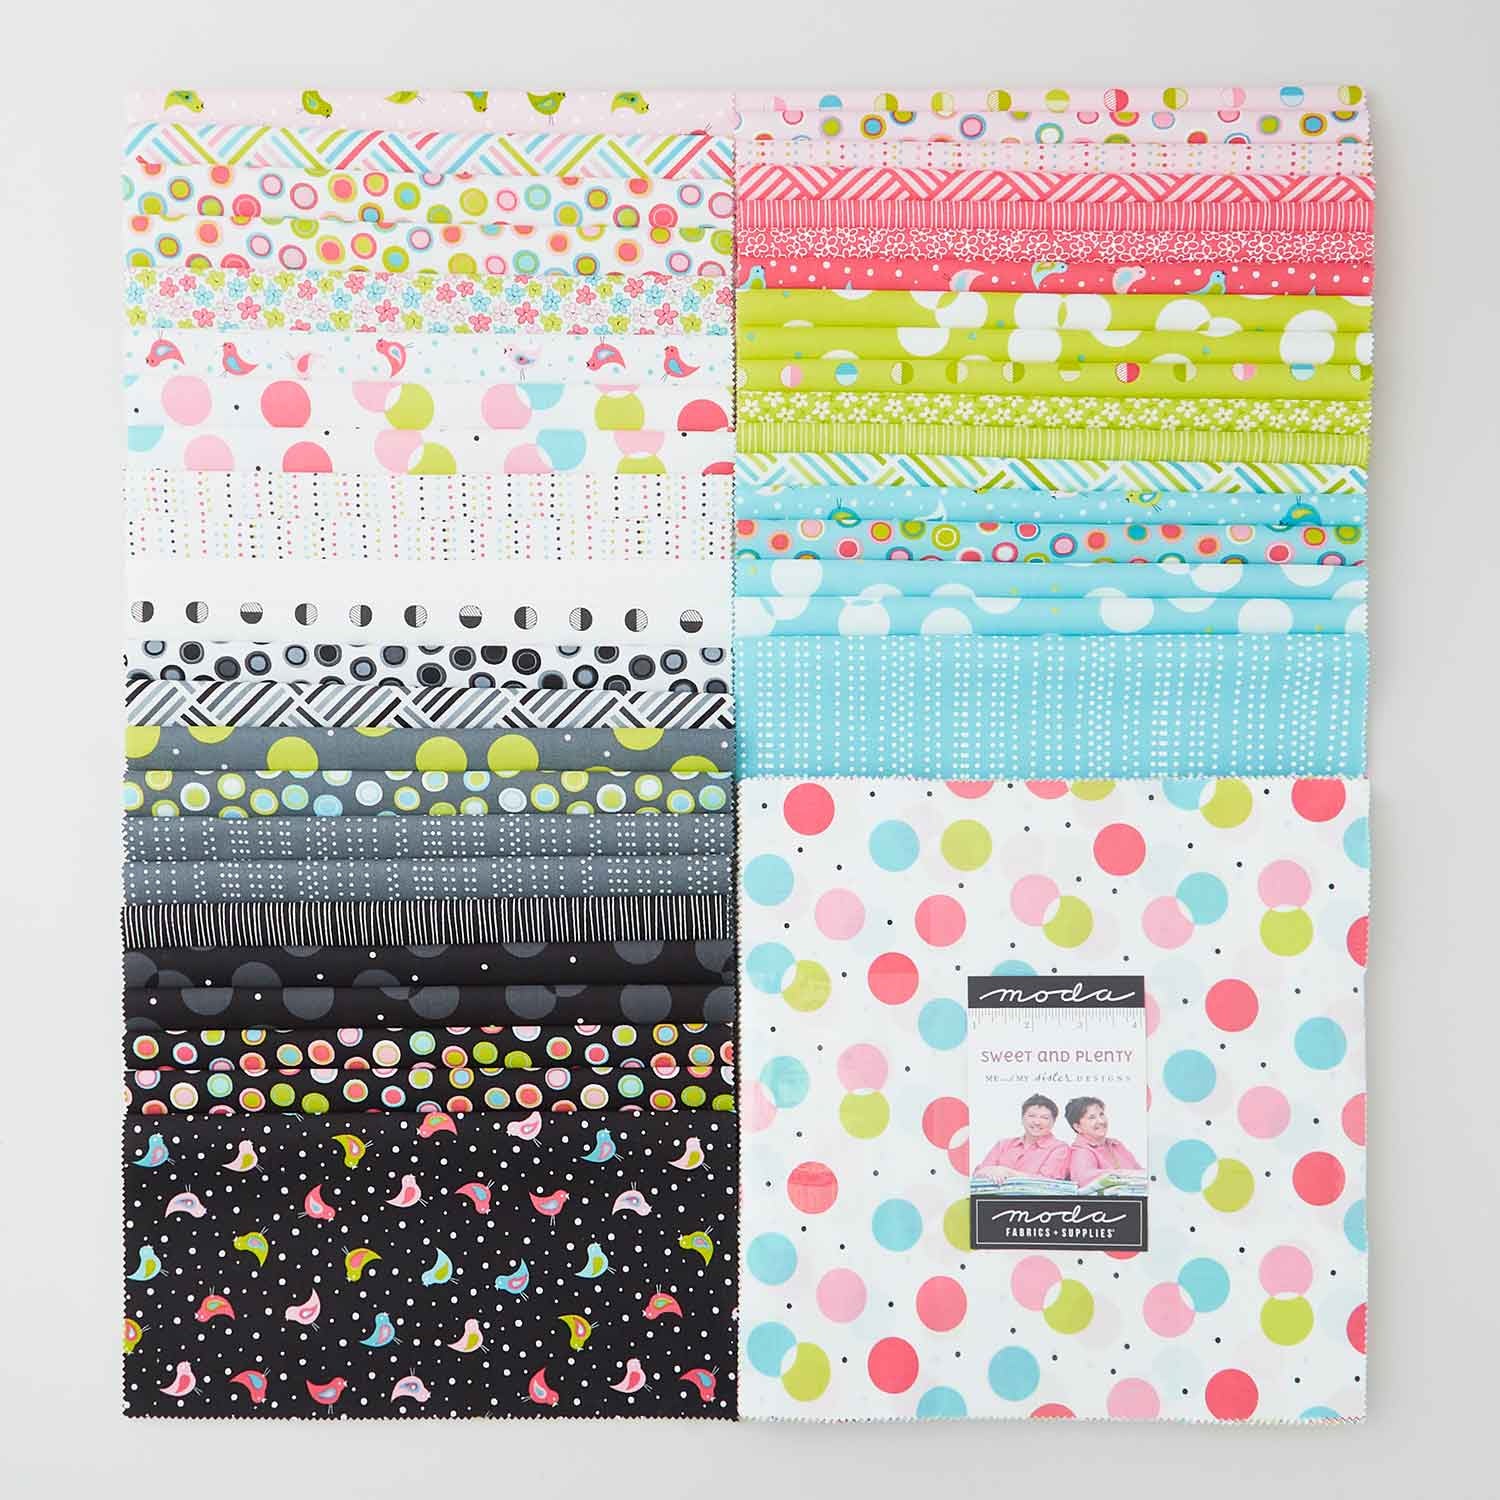  Spring Floral Fabric Squares 10x10, Layer Cake Fabric For  Quilting 10 Inch, Precut Fabric For Quilting Patchwork Crafting Green Pink